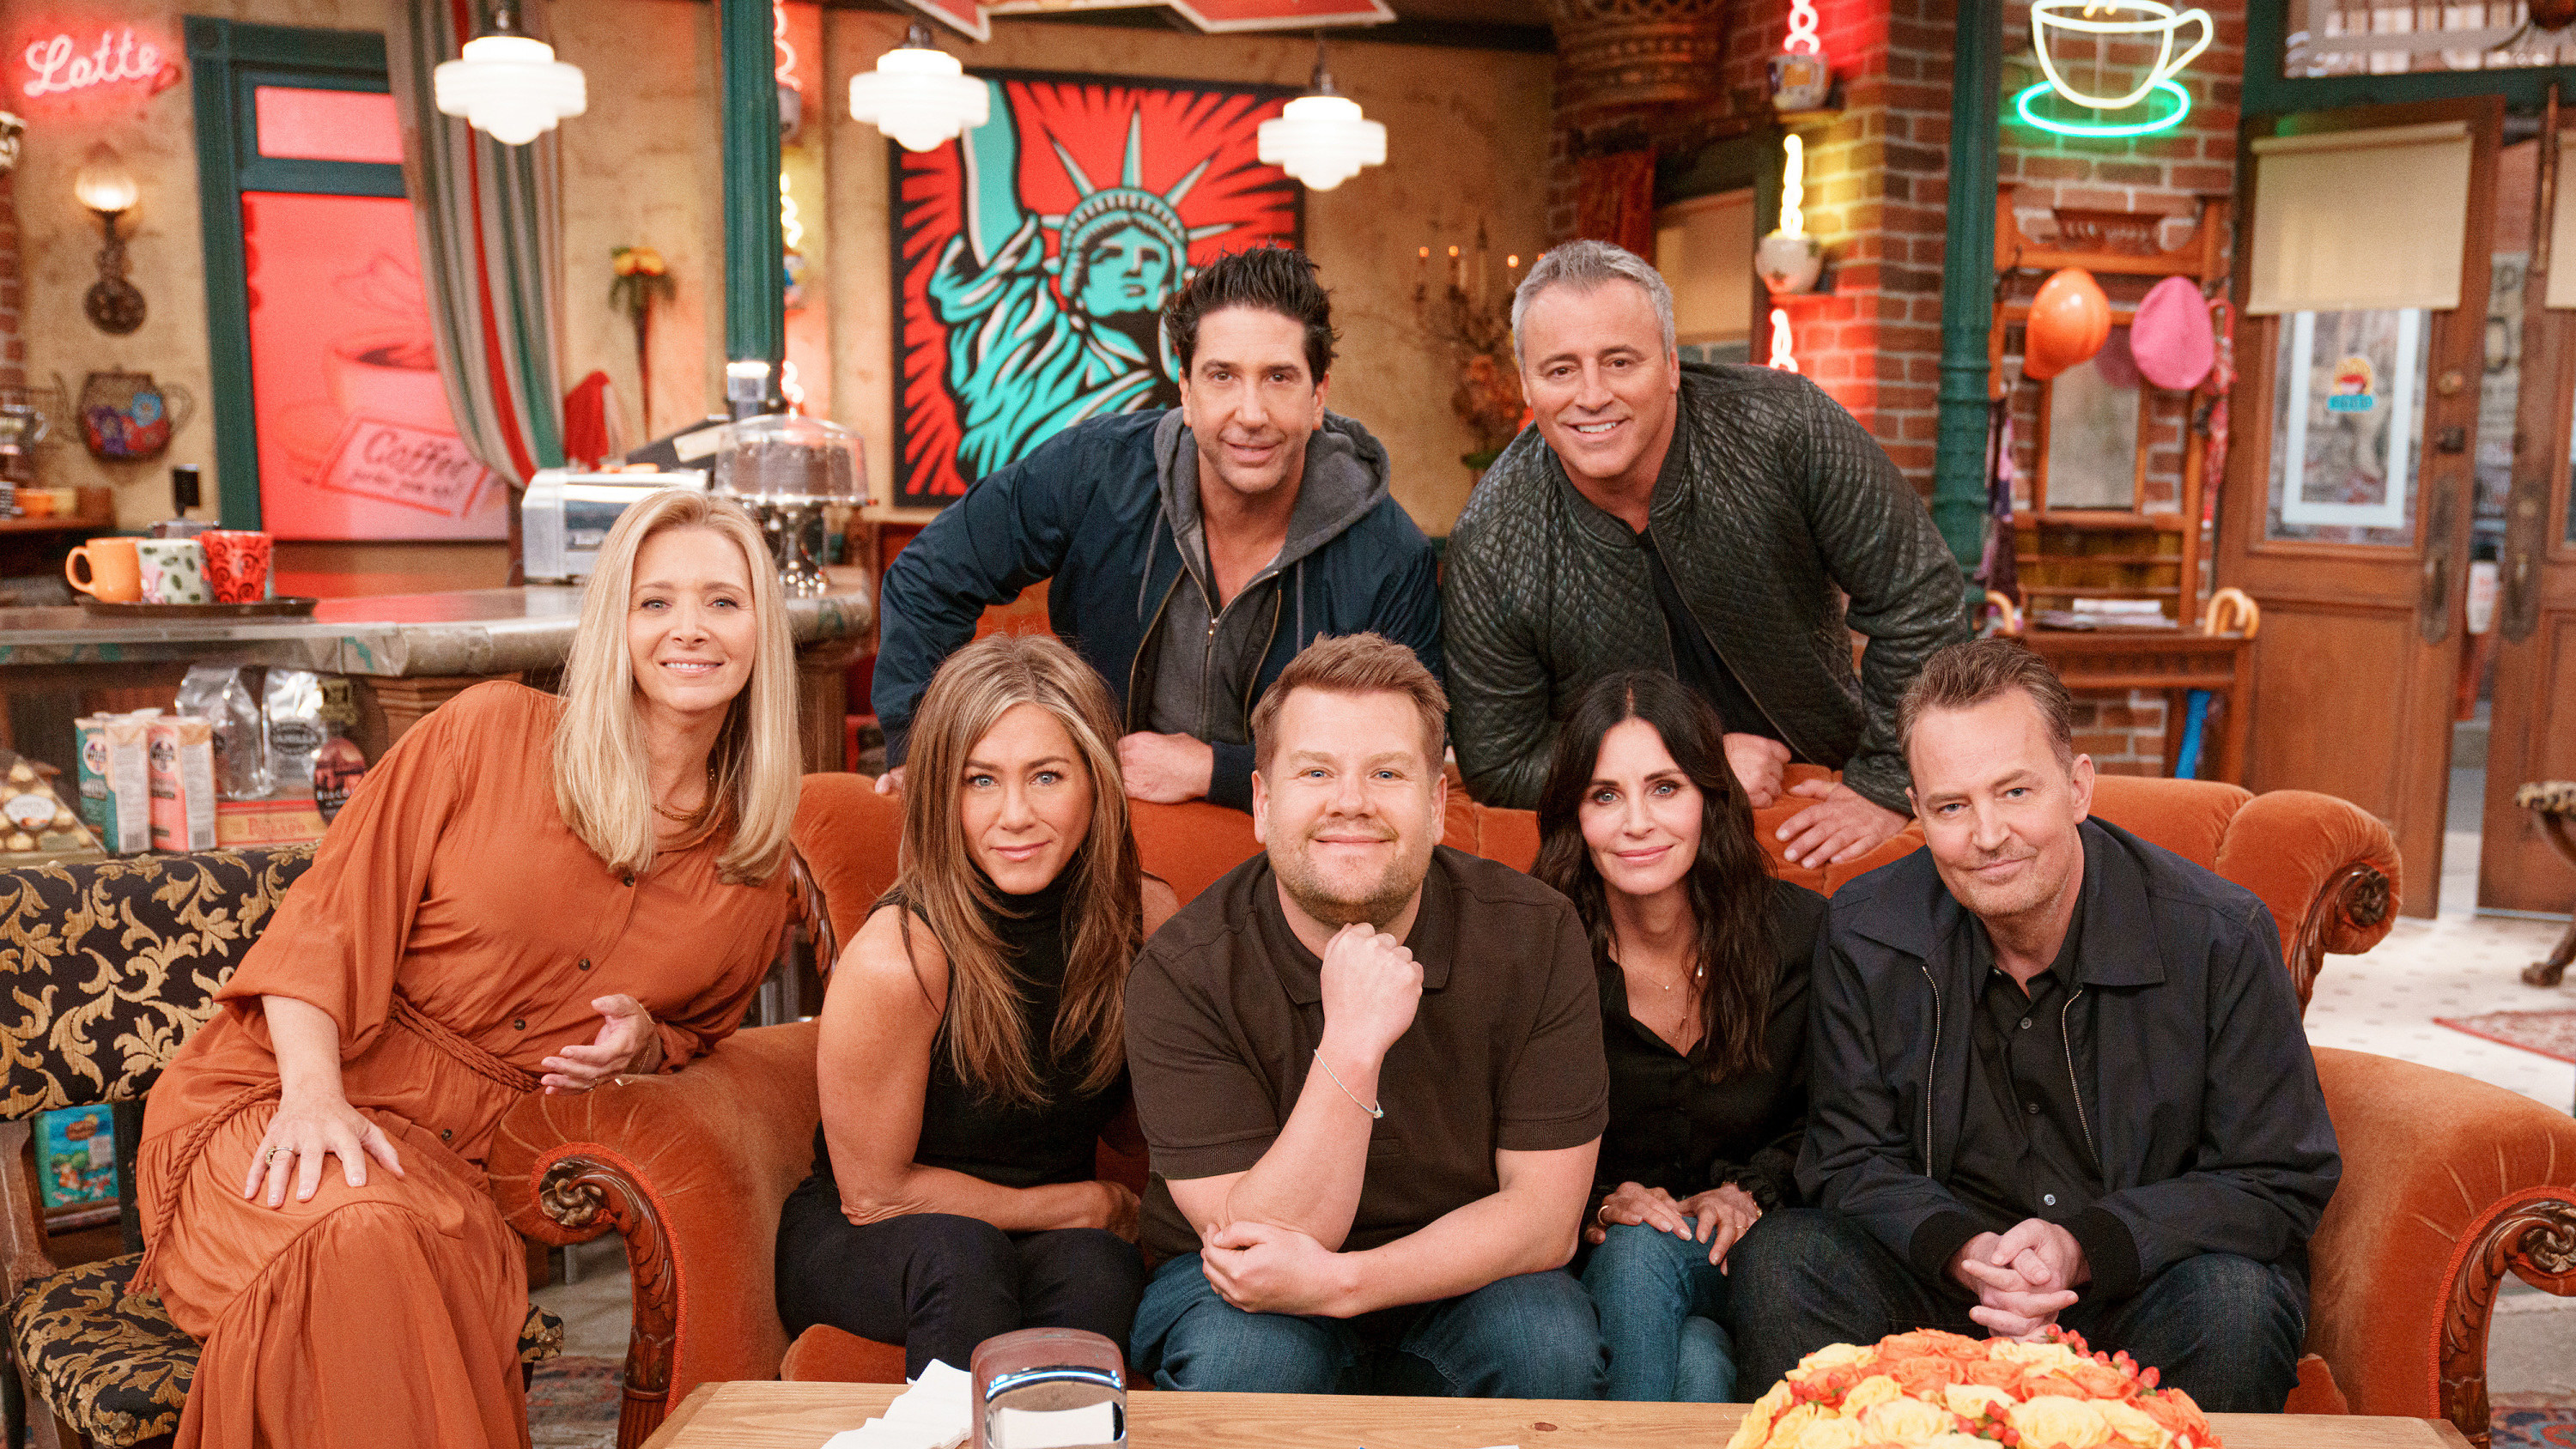 The cast of Friends sit together with James Corden